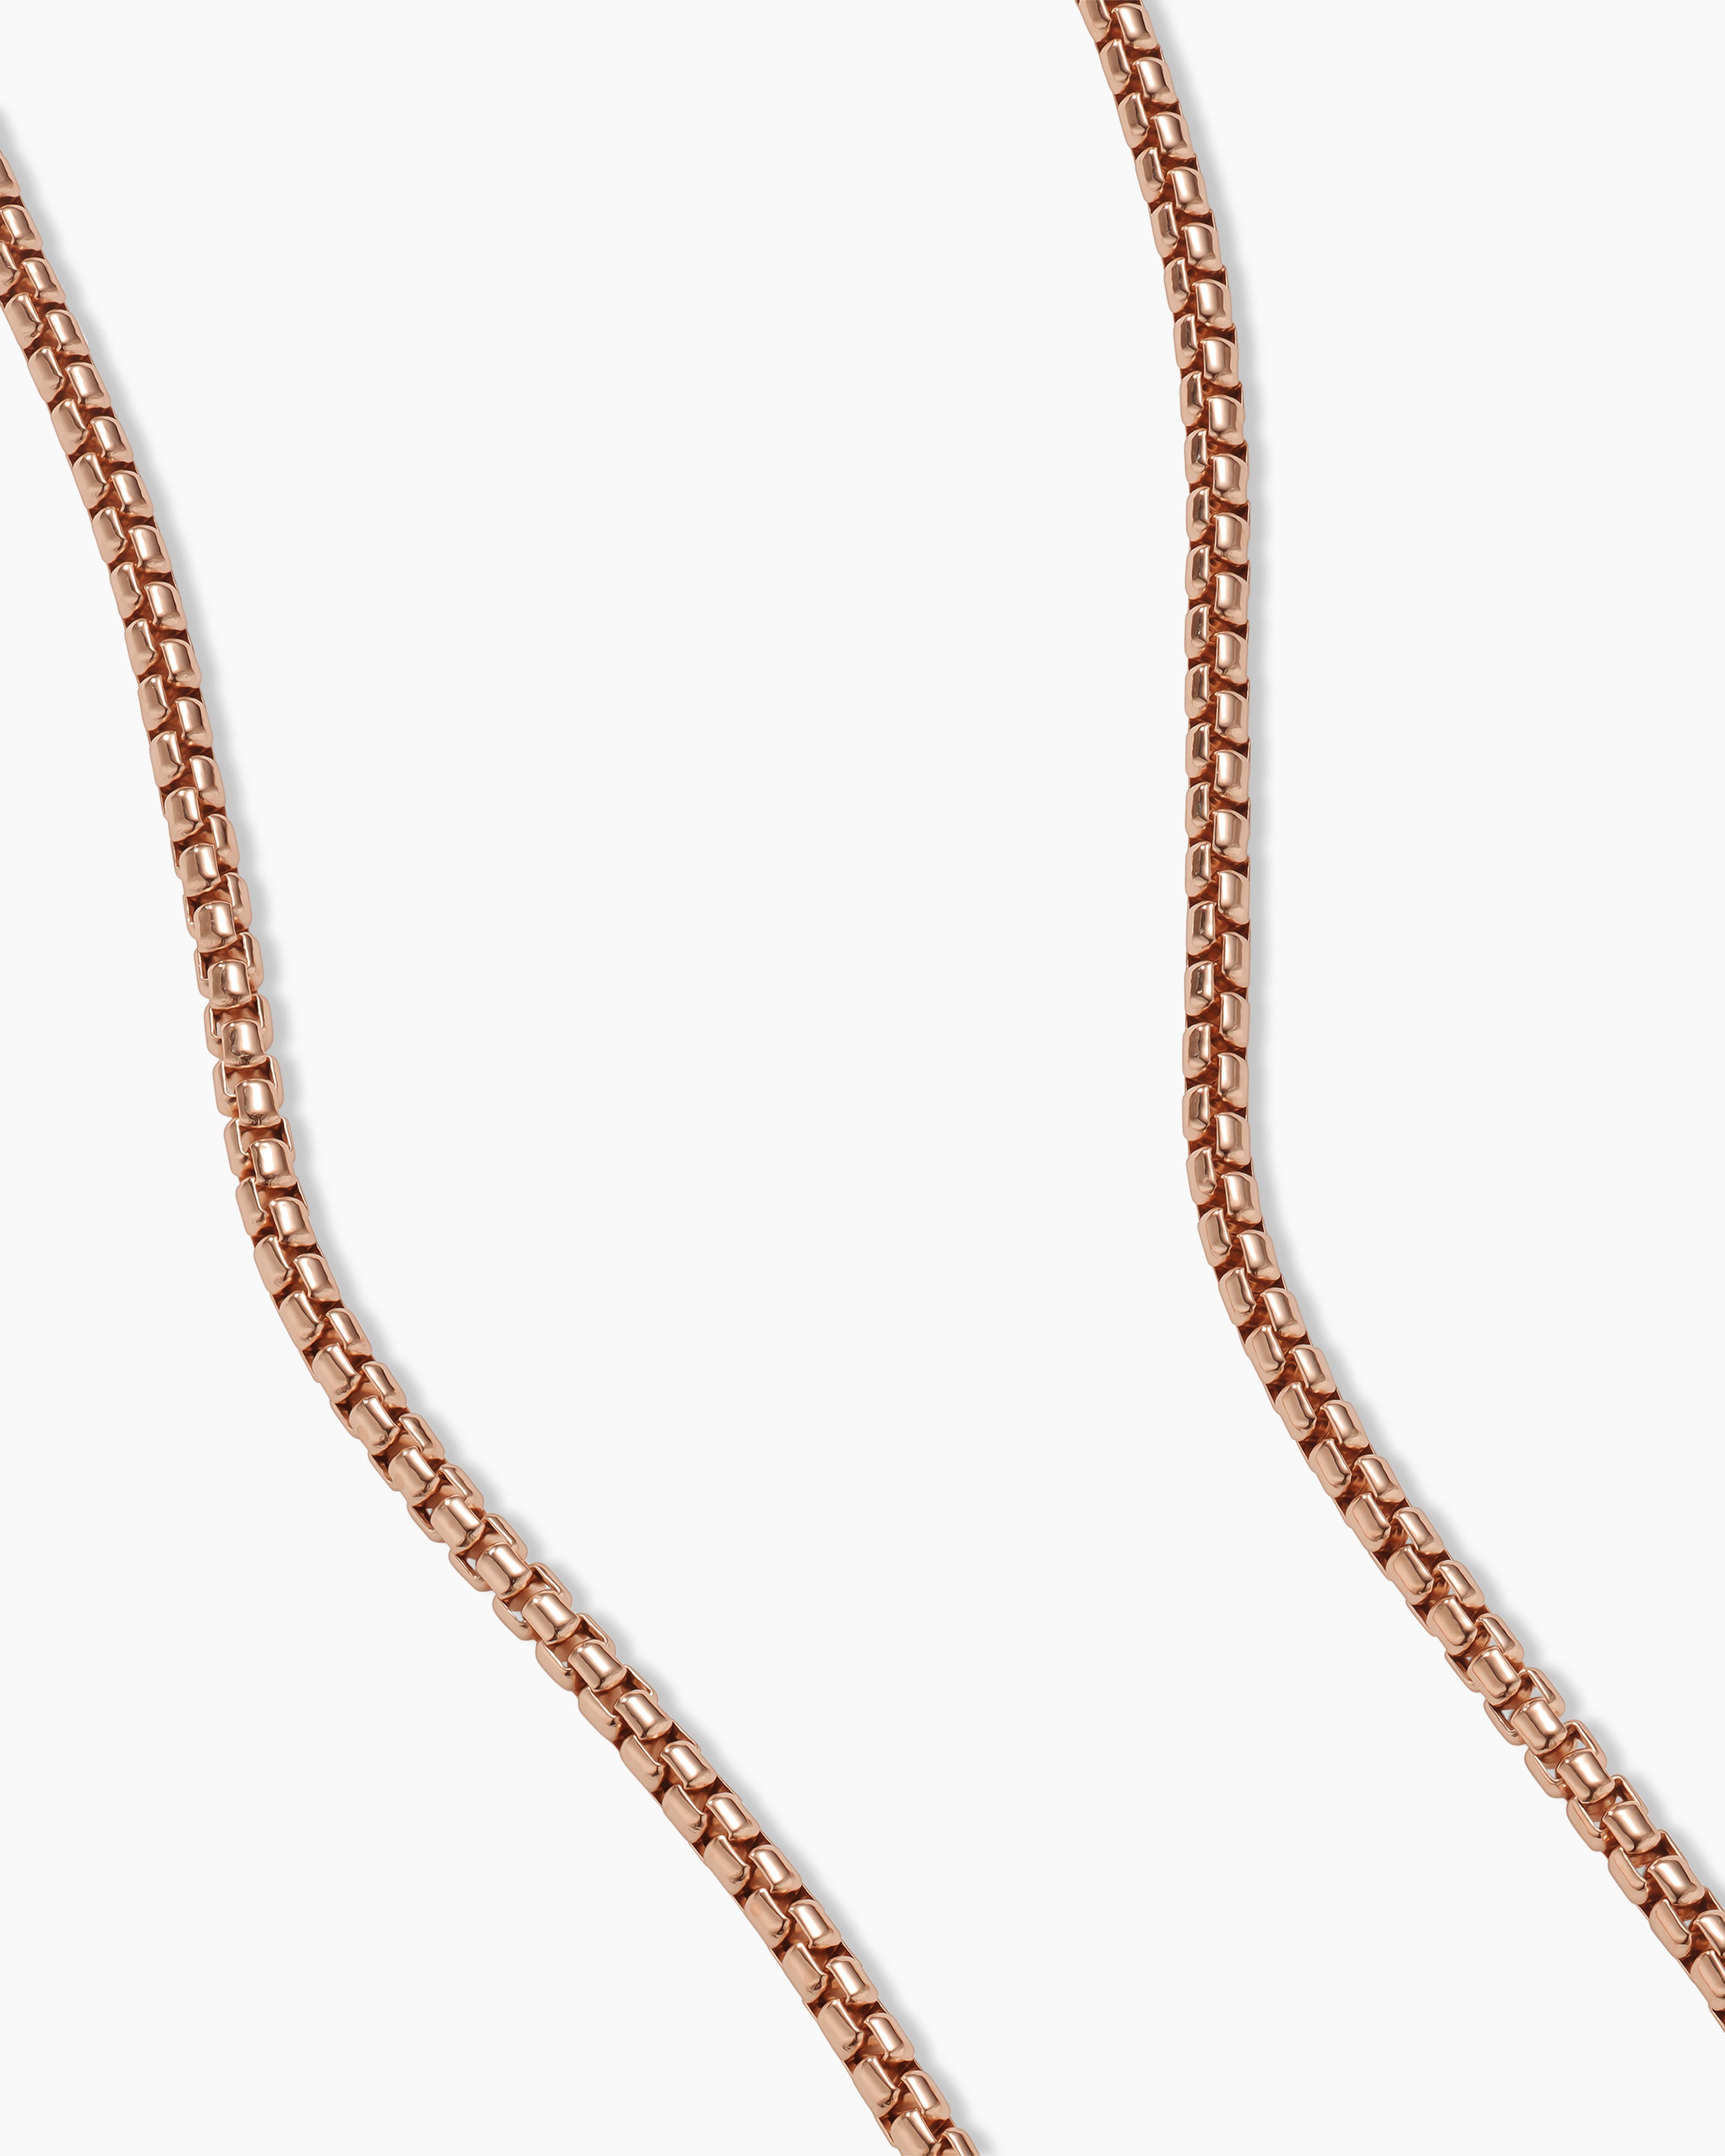 Buy Inter Linked Rose Gold Chain Necklace with Hanging Charms – The Jewelbox